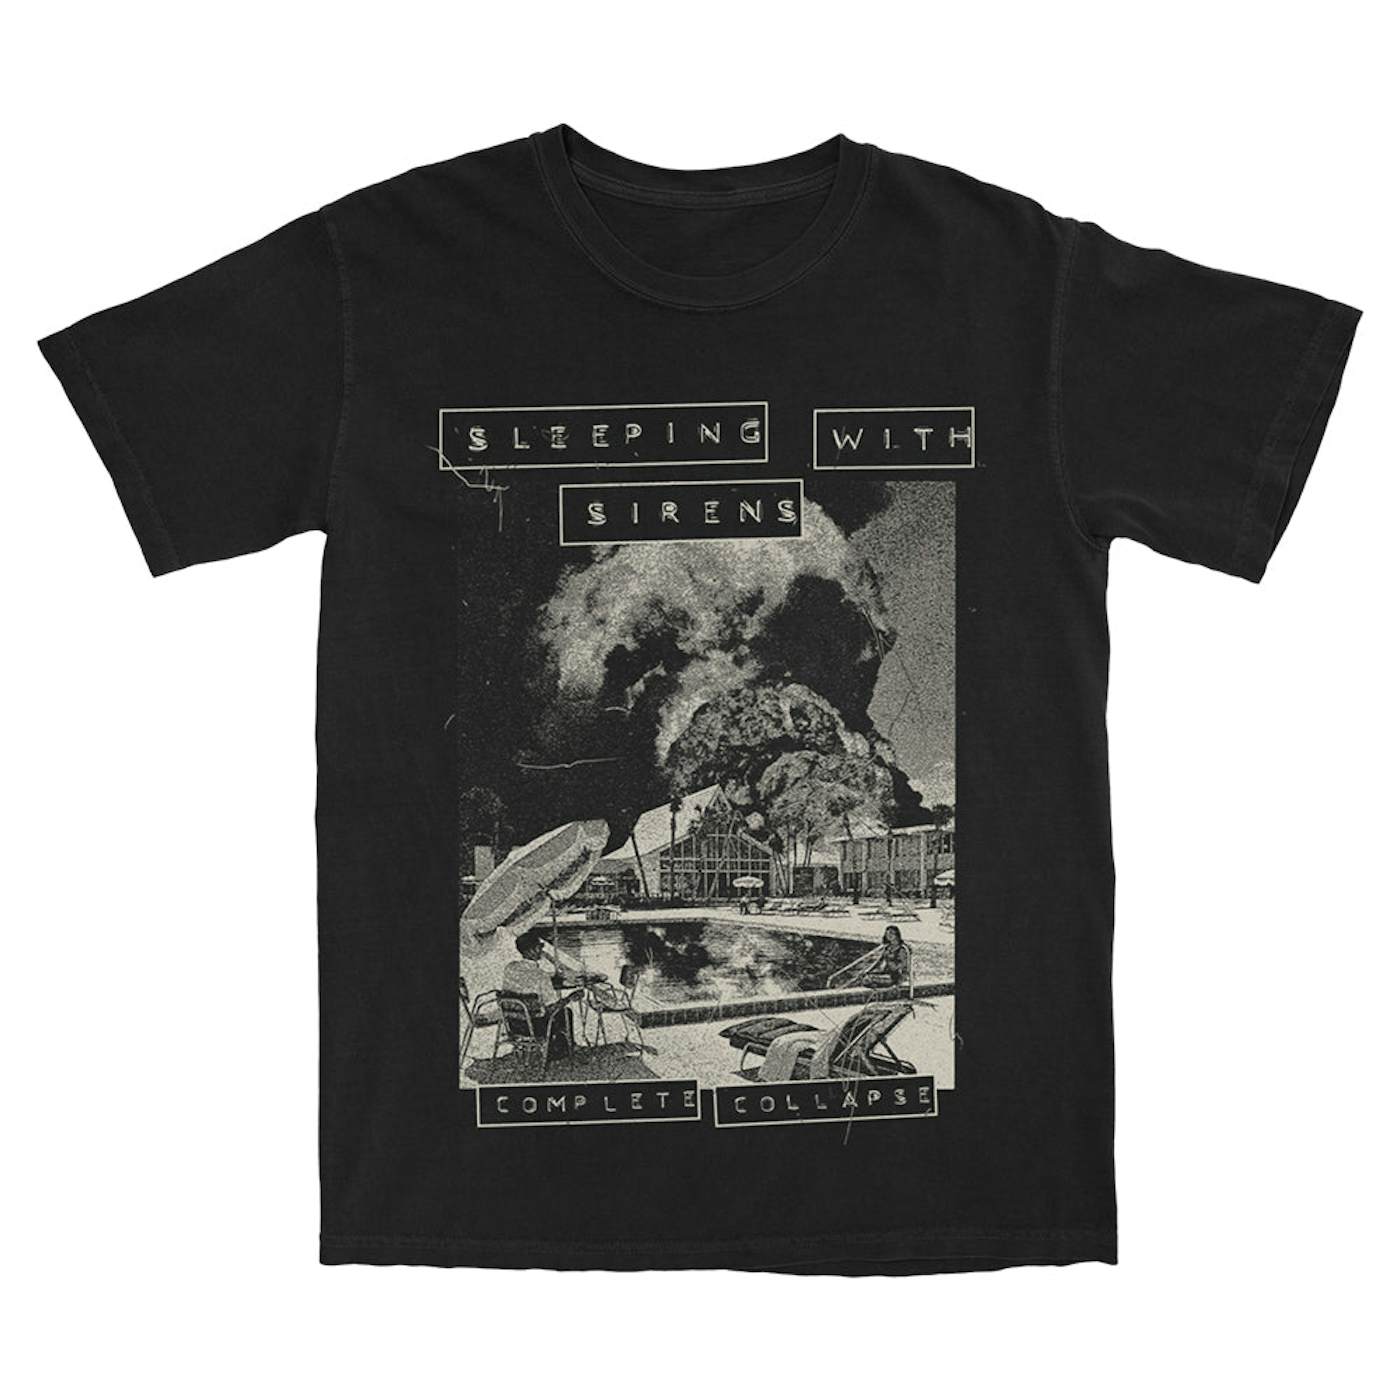 Sleeping With Sirens - "Complete Collapse" Black Tee